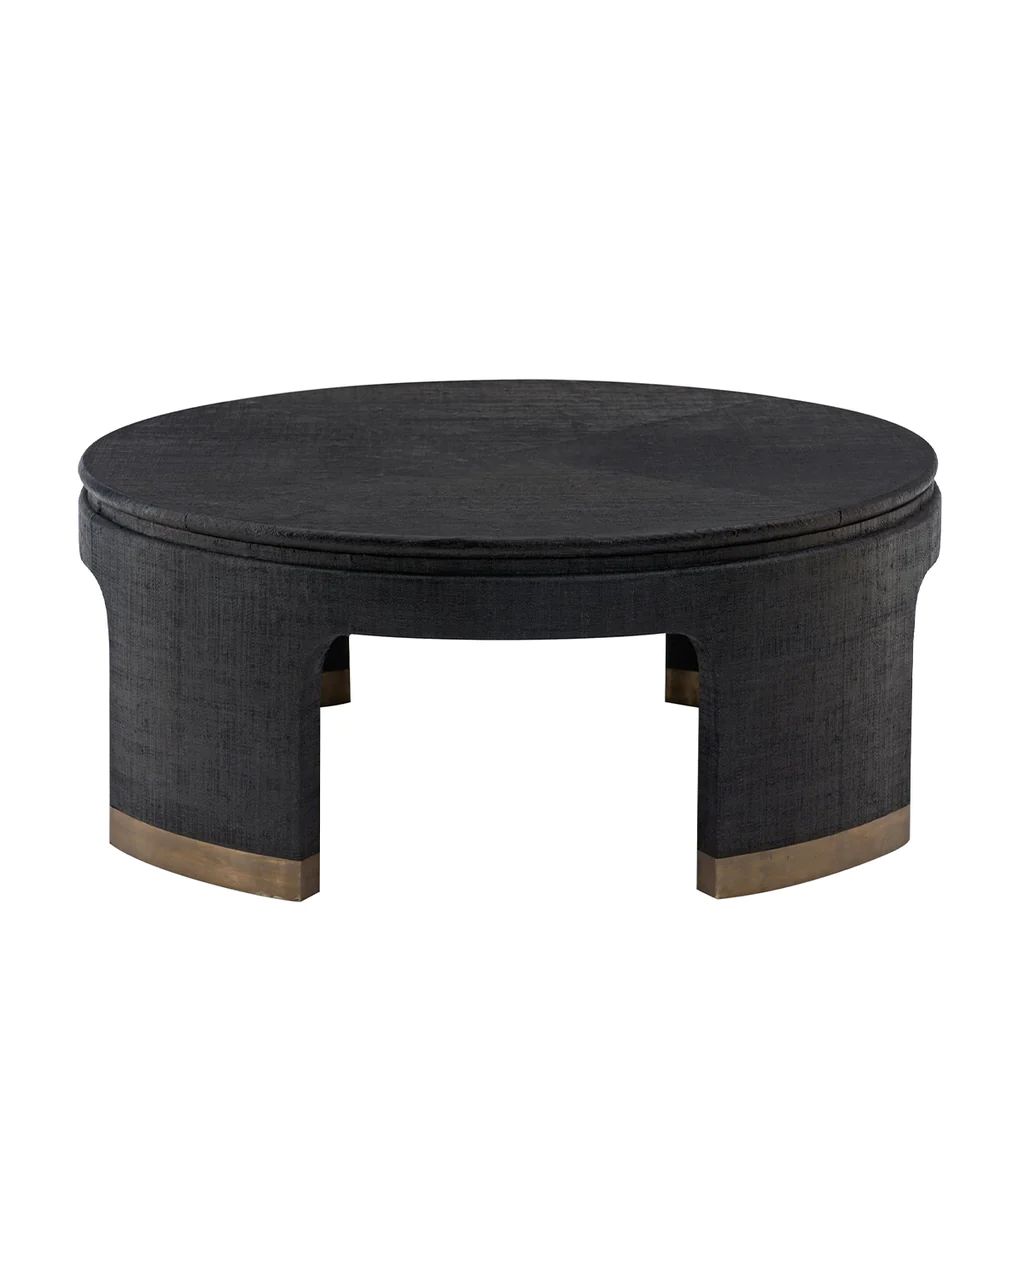 Thunell Coffee Table | McGee & Co.